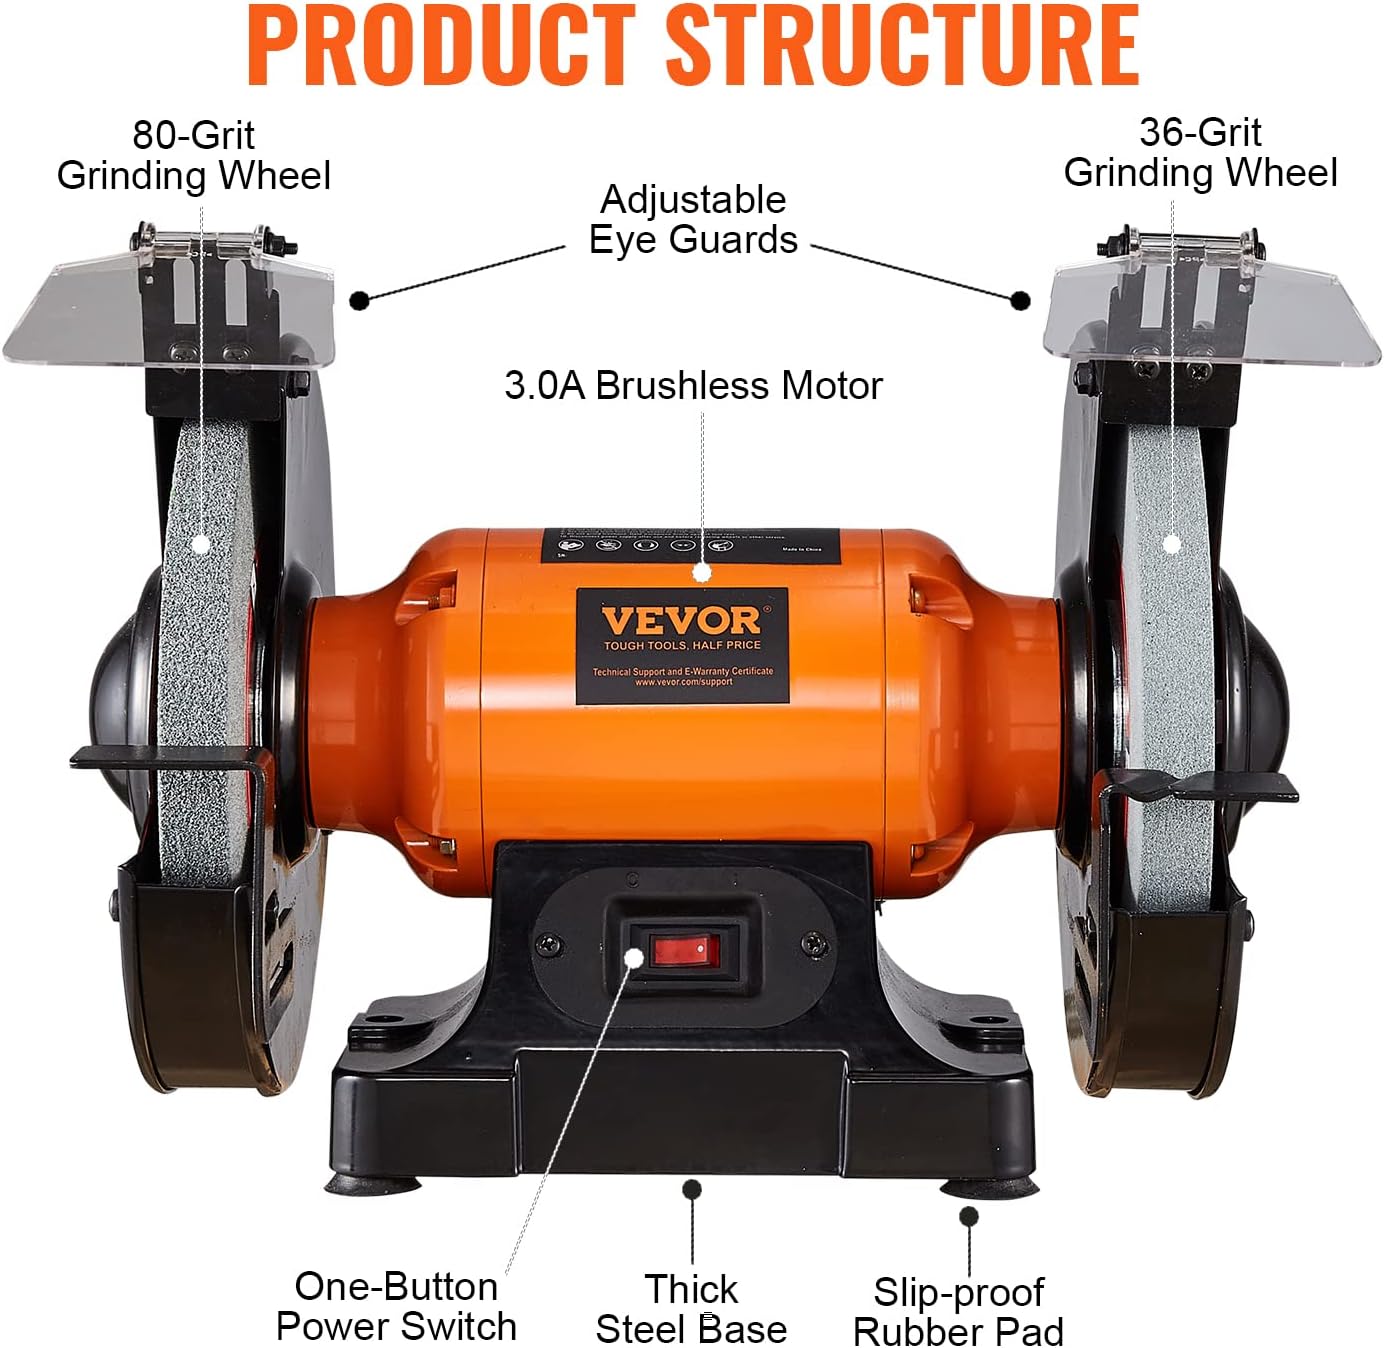 VEVOR 6 inch Bench Grinder, 750W Motor, Variable-Speed Benchtop Grinder with 3400 RPM and Work Light, Two Types Wheels for Grinding, Sharping and Smoothing